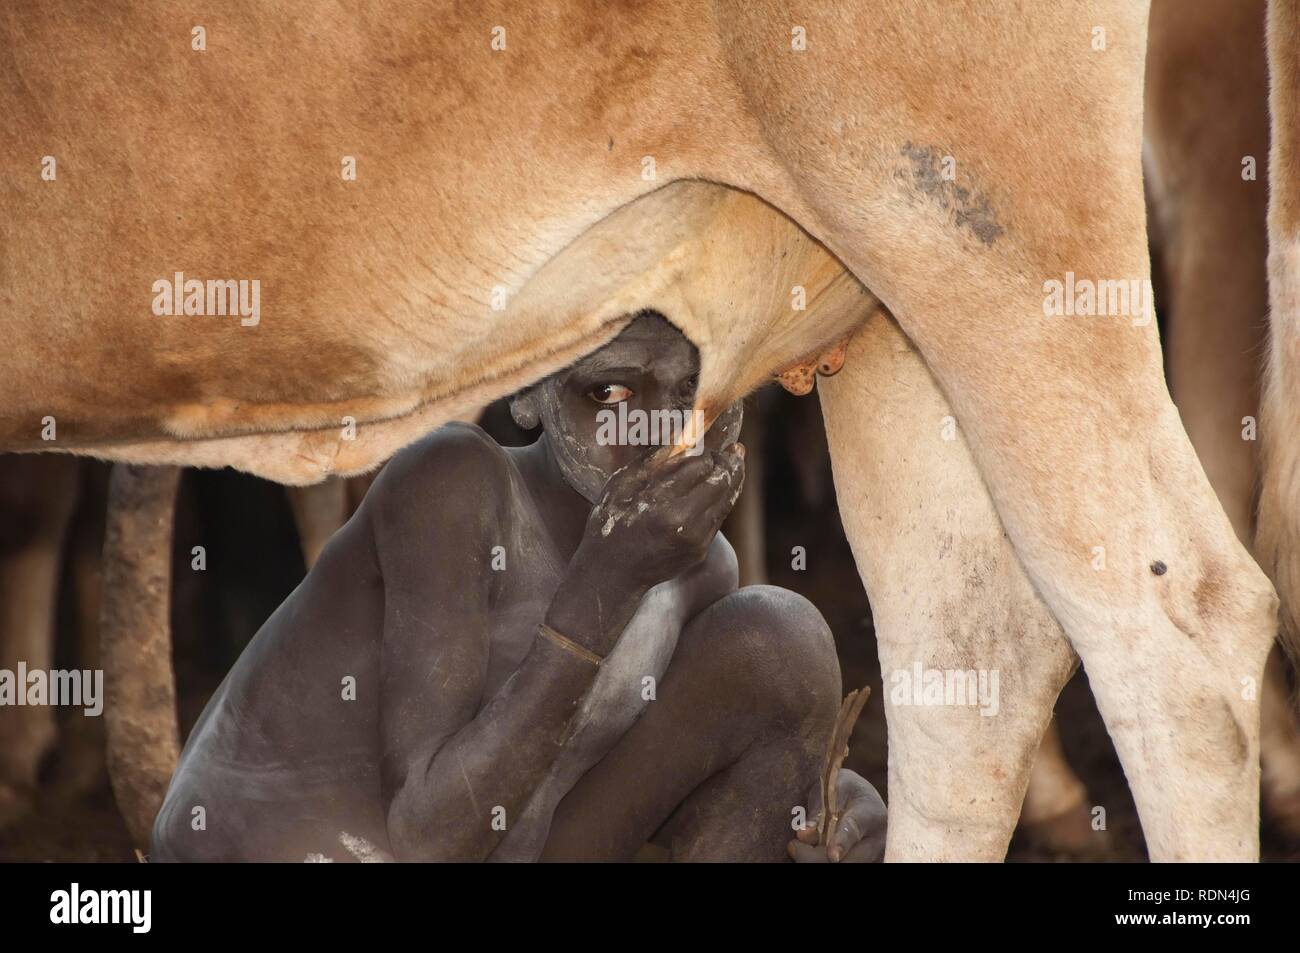 Surma boy drinking milk from the cows udder, Omo River Valley, Ethiopia, Africa Stock Photo